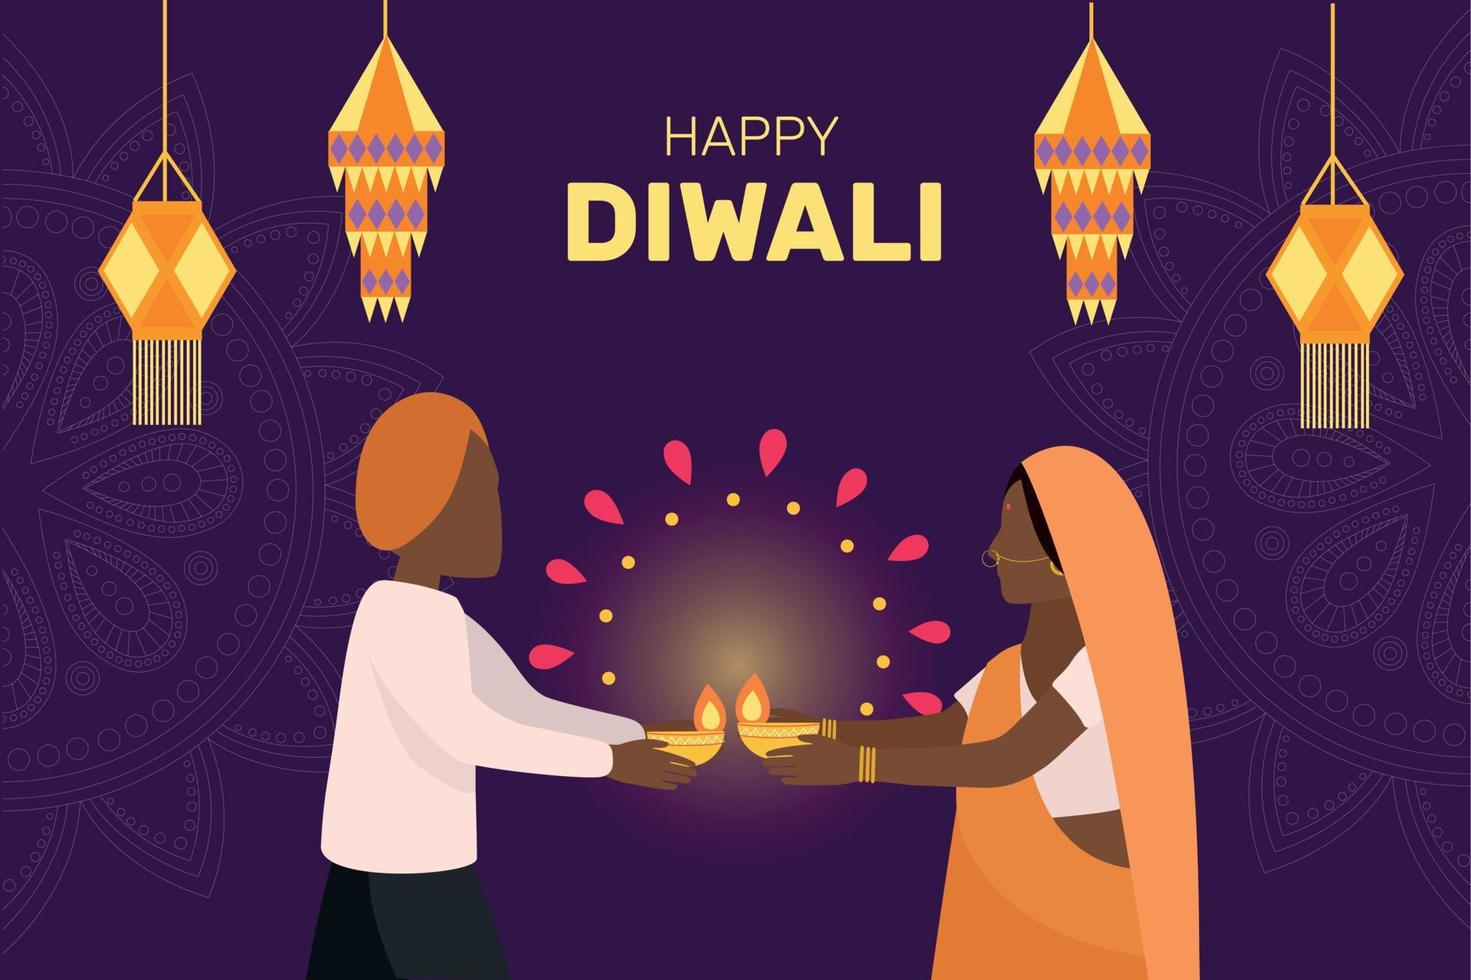 A man in traditional Indian clothing and a woman in an orange sari hold illuminated oil lamps. Sky lanterns and mandala in the background. Orange sari. Happy Diwali holiday. vector